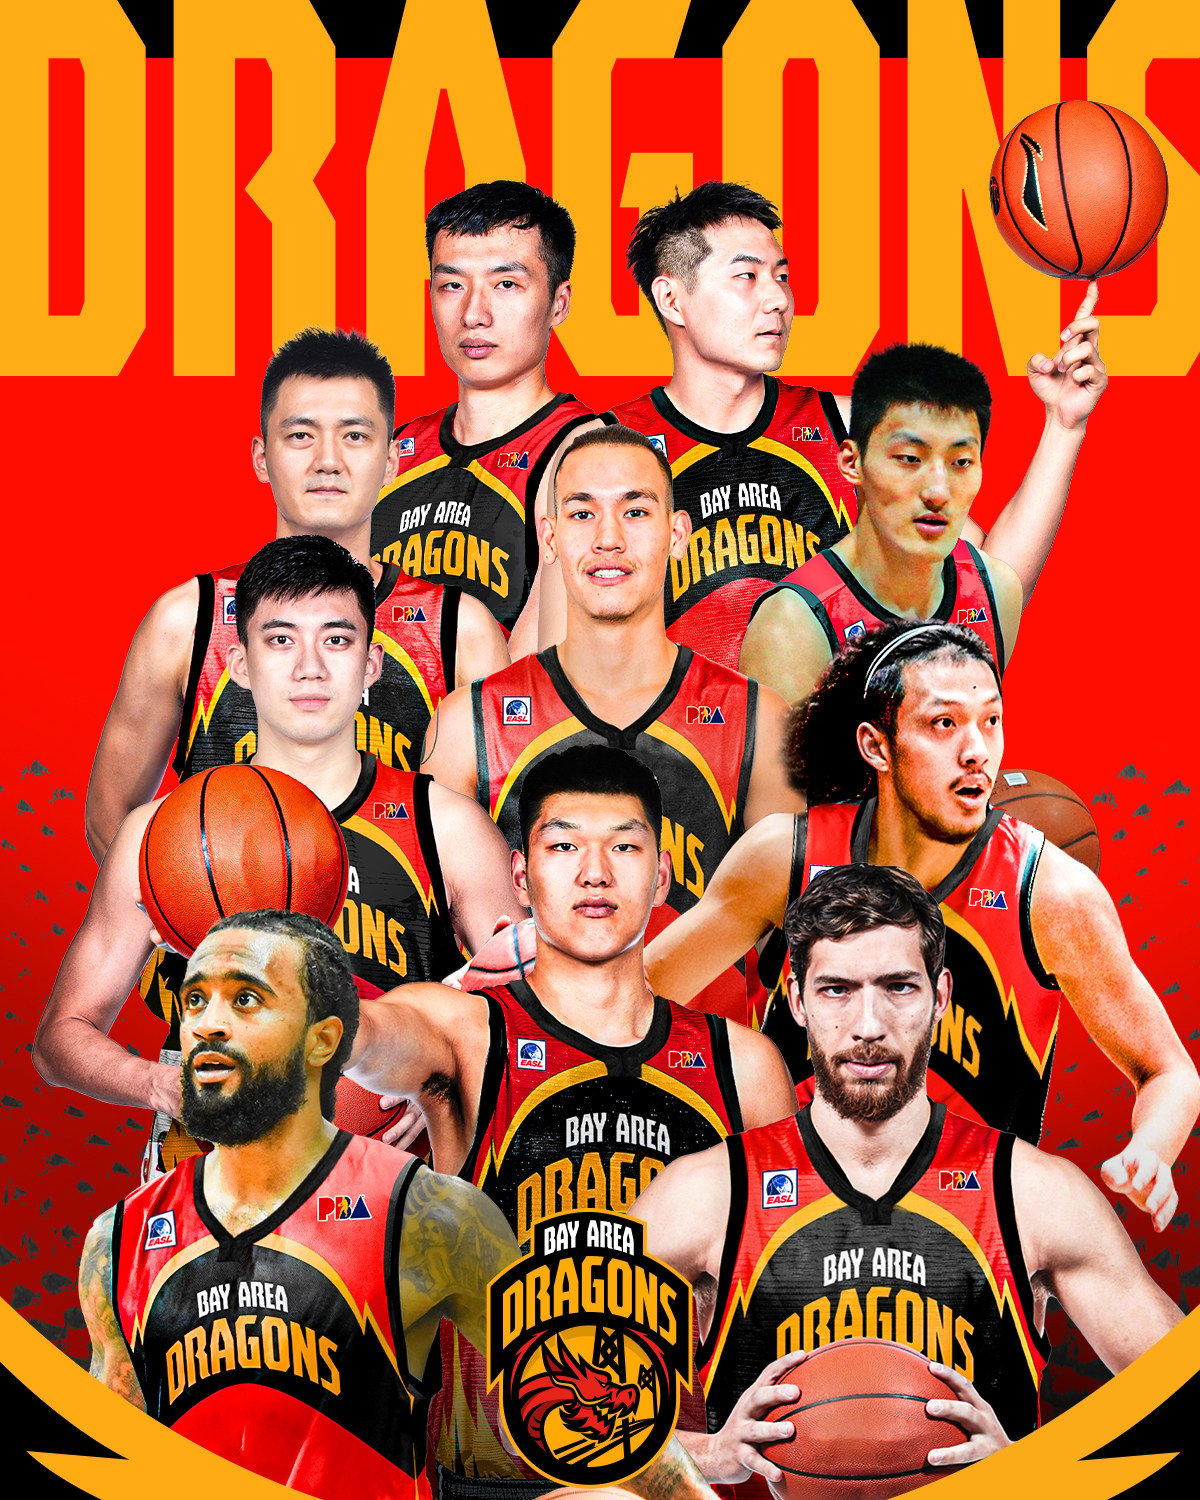 The team poster for the Bay Area Dragons. Photo: Handout